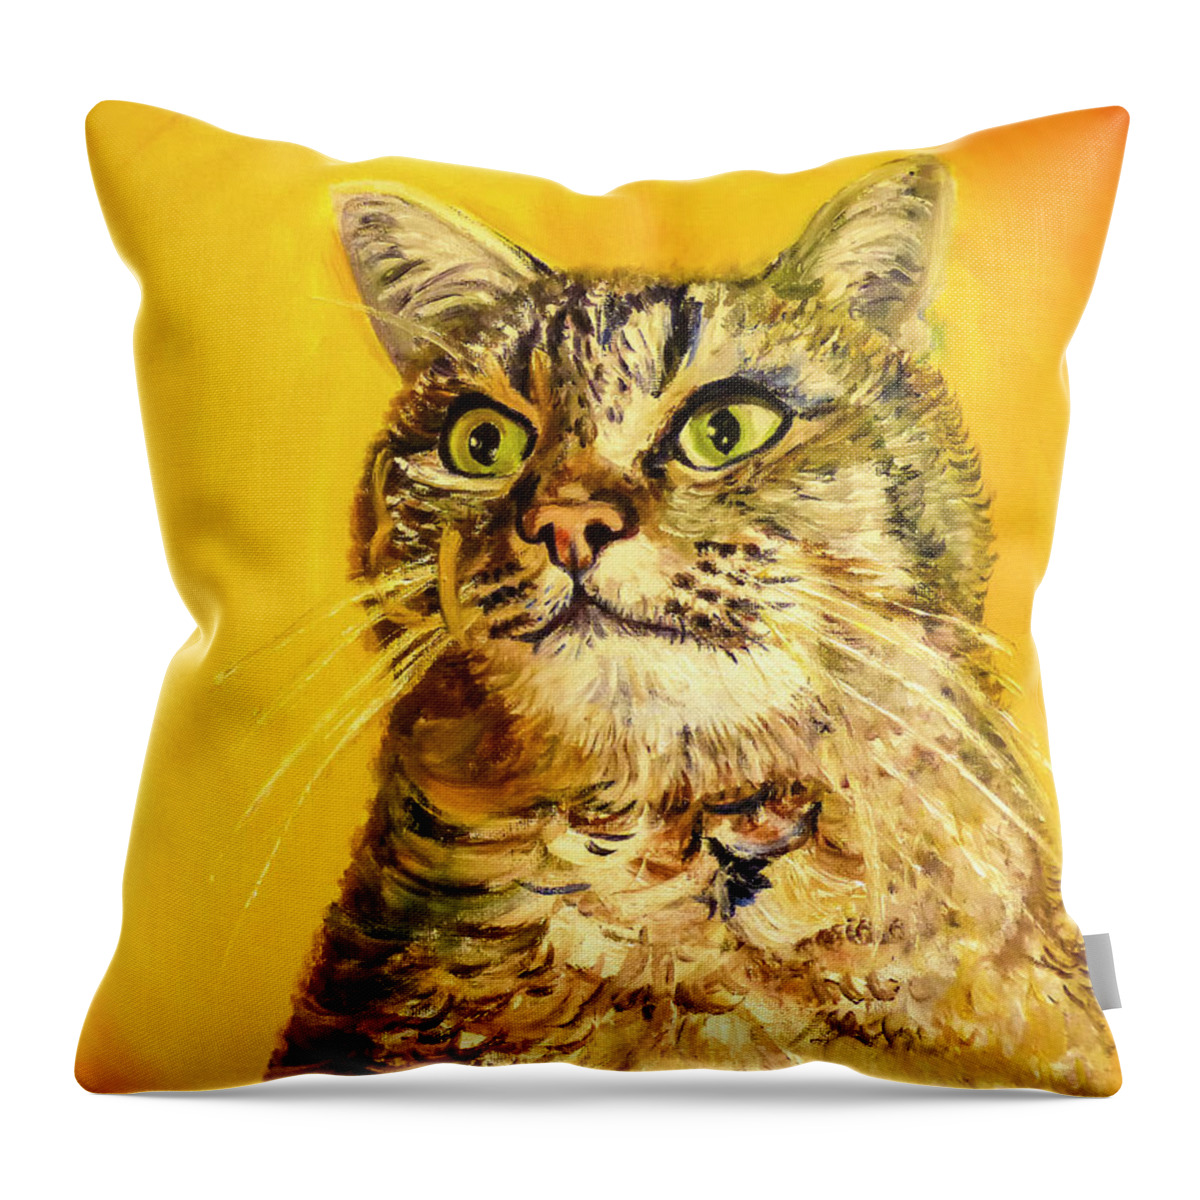 Brown Throw Pillow featuring the painting Litty Kitty by Rowan Lyford